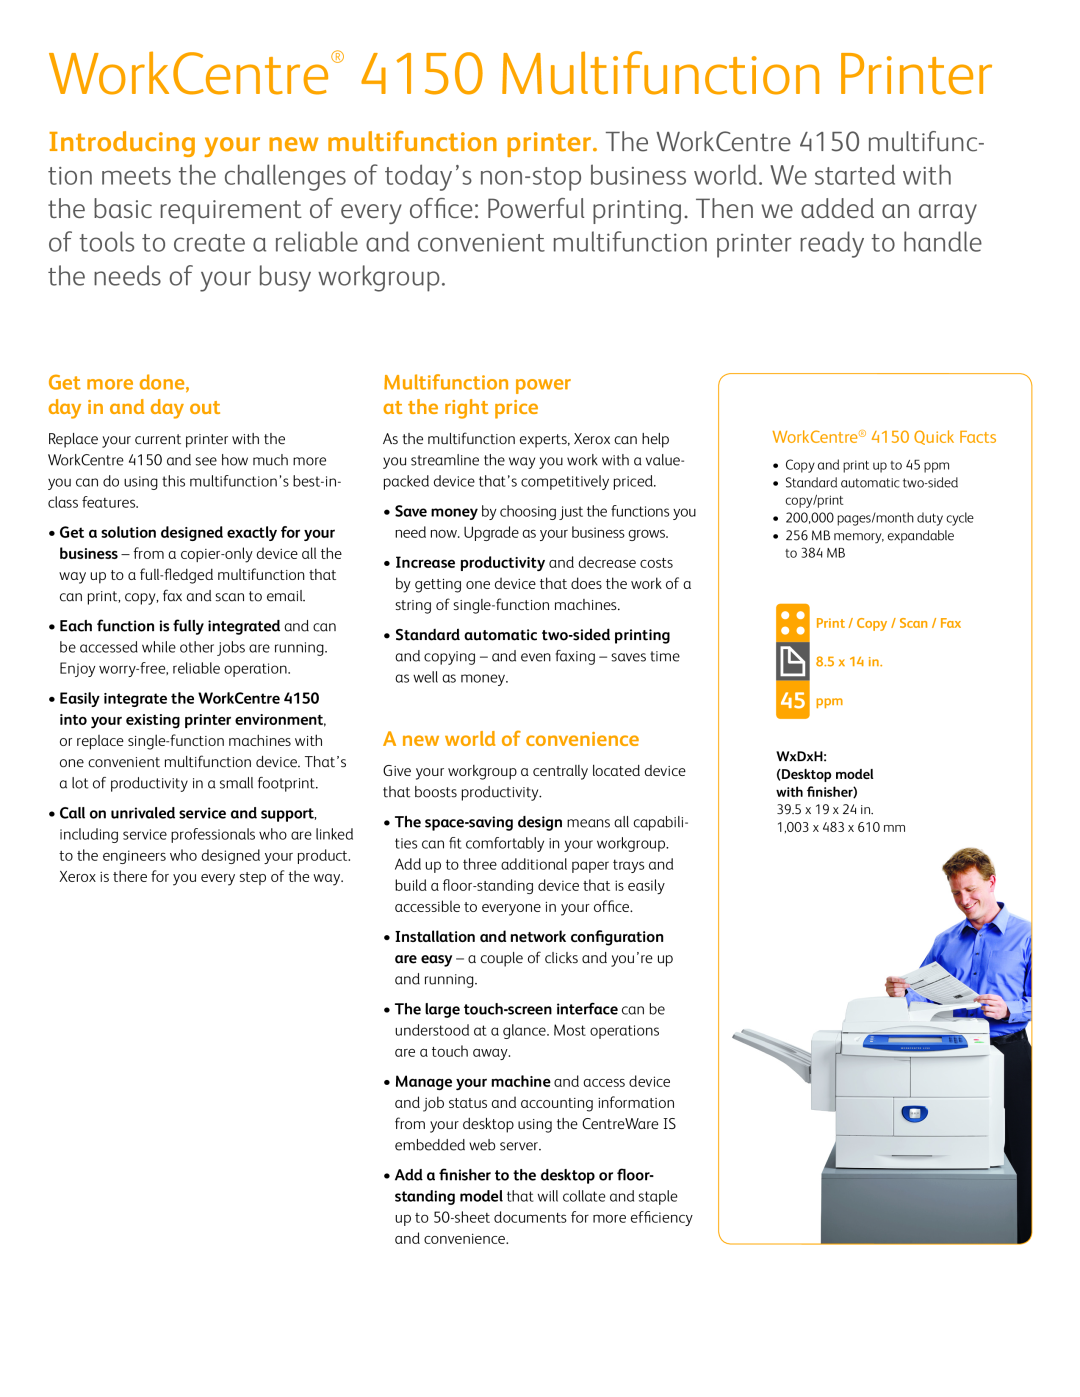 Xerox 4150/XF, 4150/S WorkCentre 4150 Quick Facts, WorkCentre 4150 Multifunction Printer, A new world of convenience 